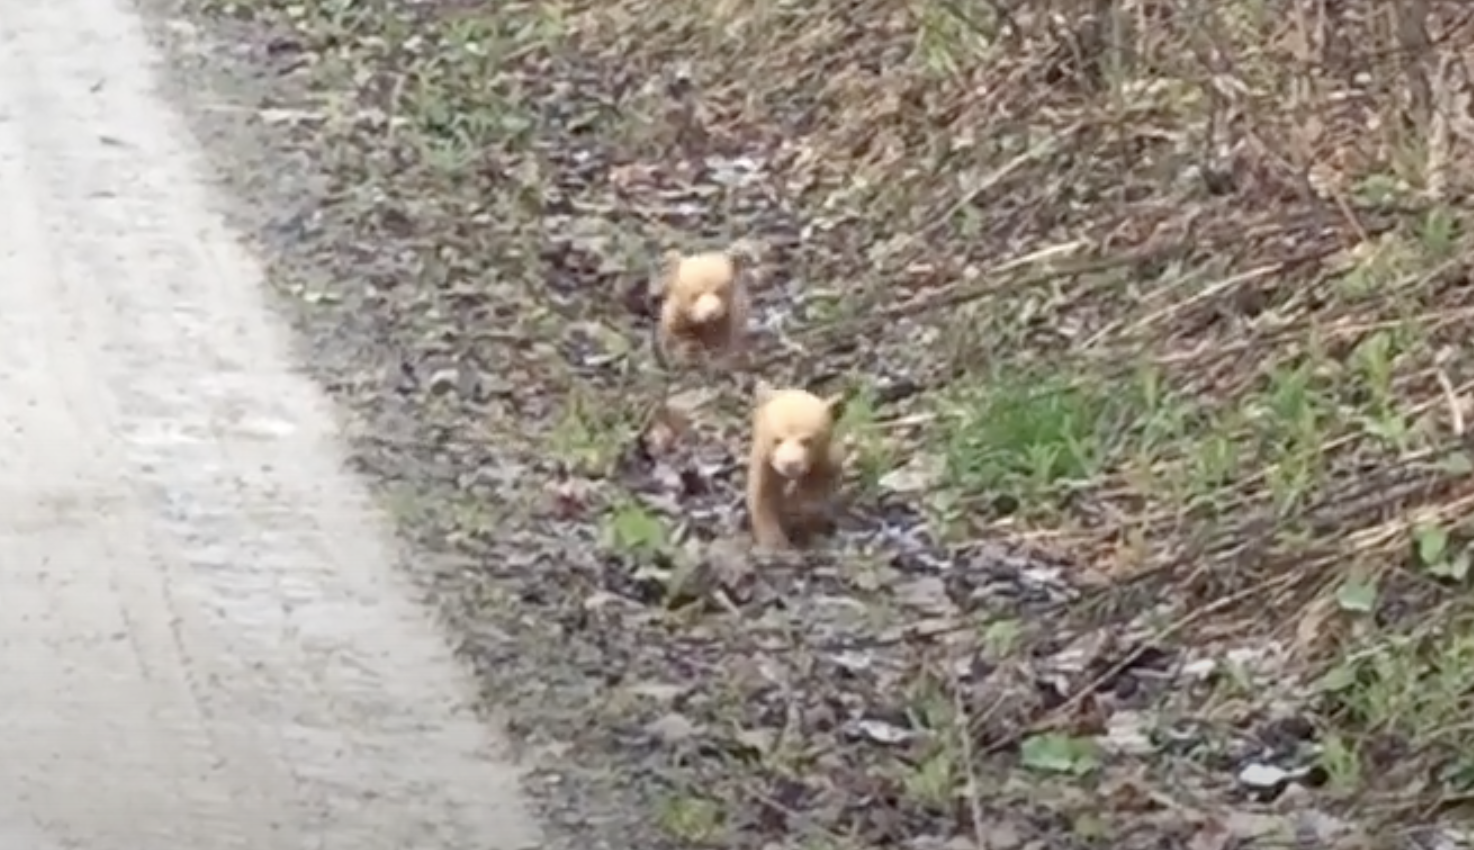 VIDEO: Adorable Black Bear Cubs Attempt To Charge Camera Man